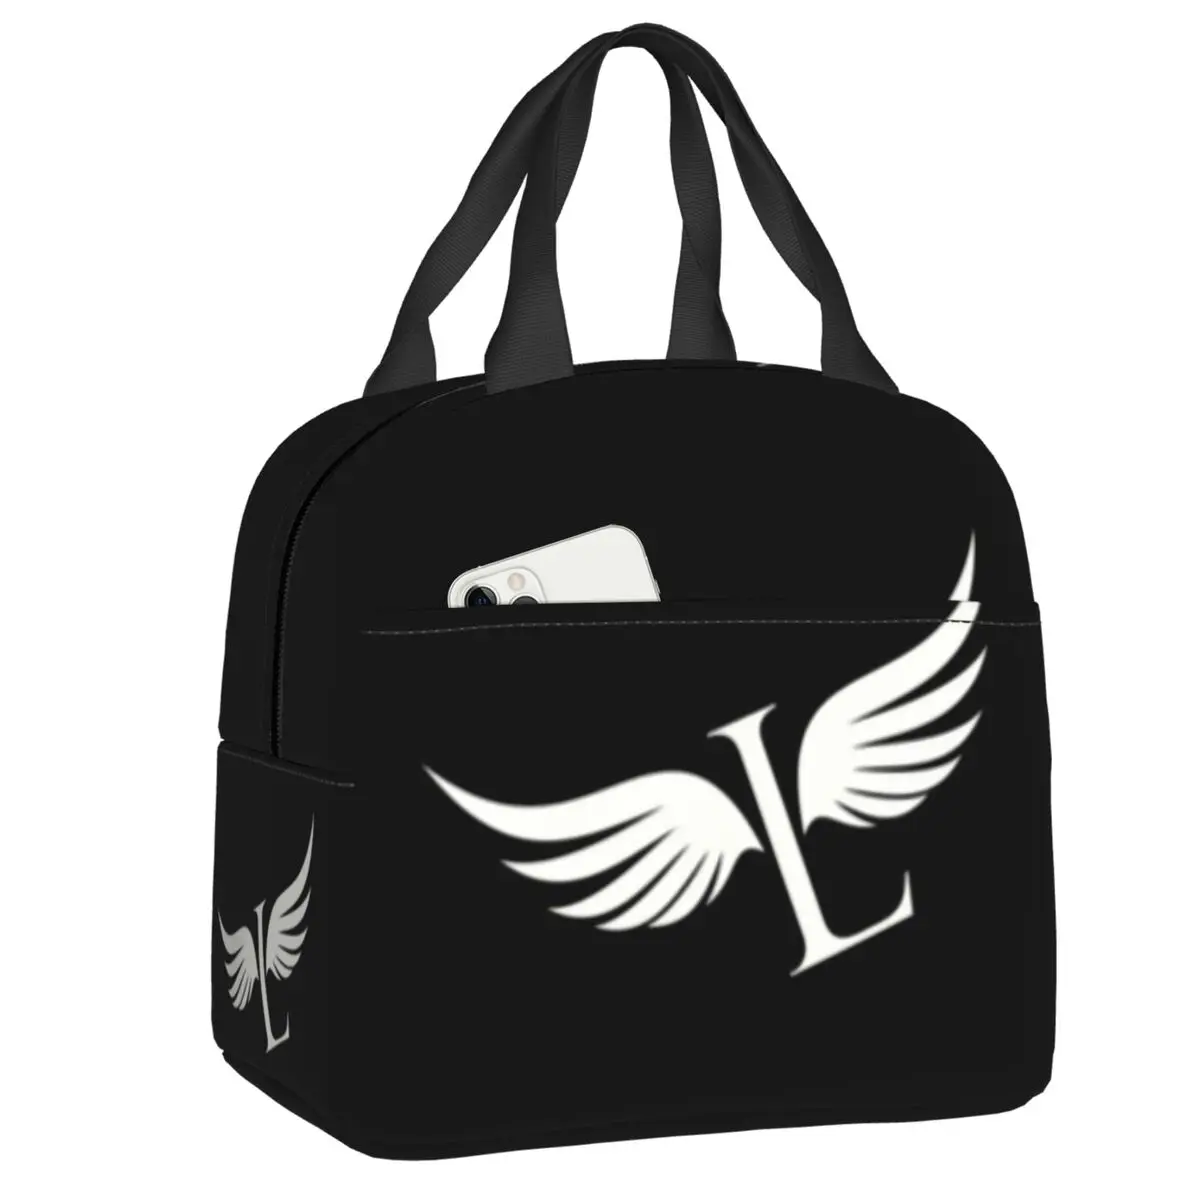 

Lucifer Wings Logo Insulated Lunch Bags for Women Morningstar Devil Portable Cooler Thermal Bento Box Outdoor Camping Travel